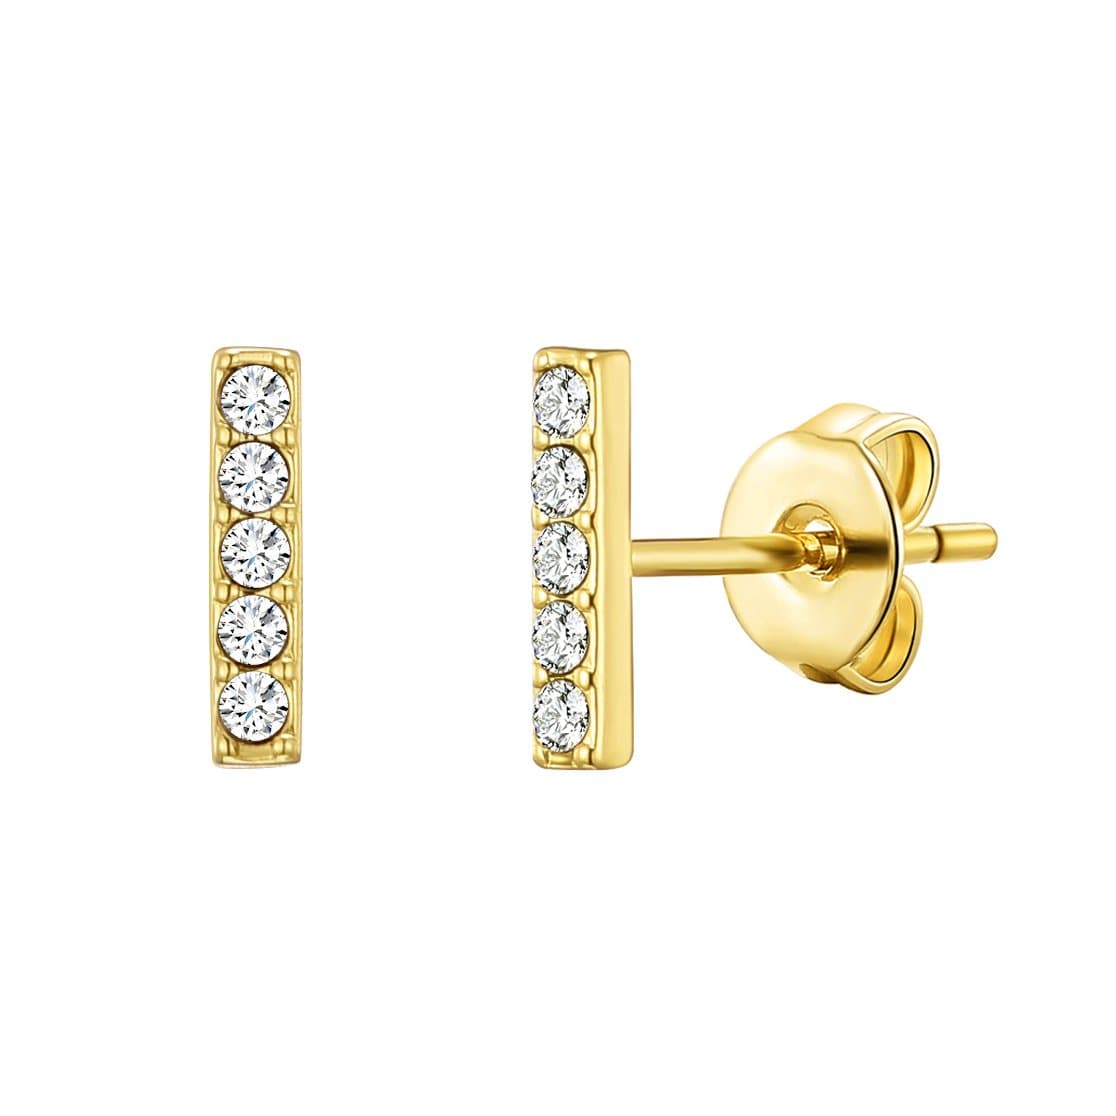 Gold Plated Bar Earrings Created with Zircondia® Crystals by Philip Jones Jewellery